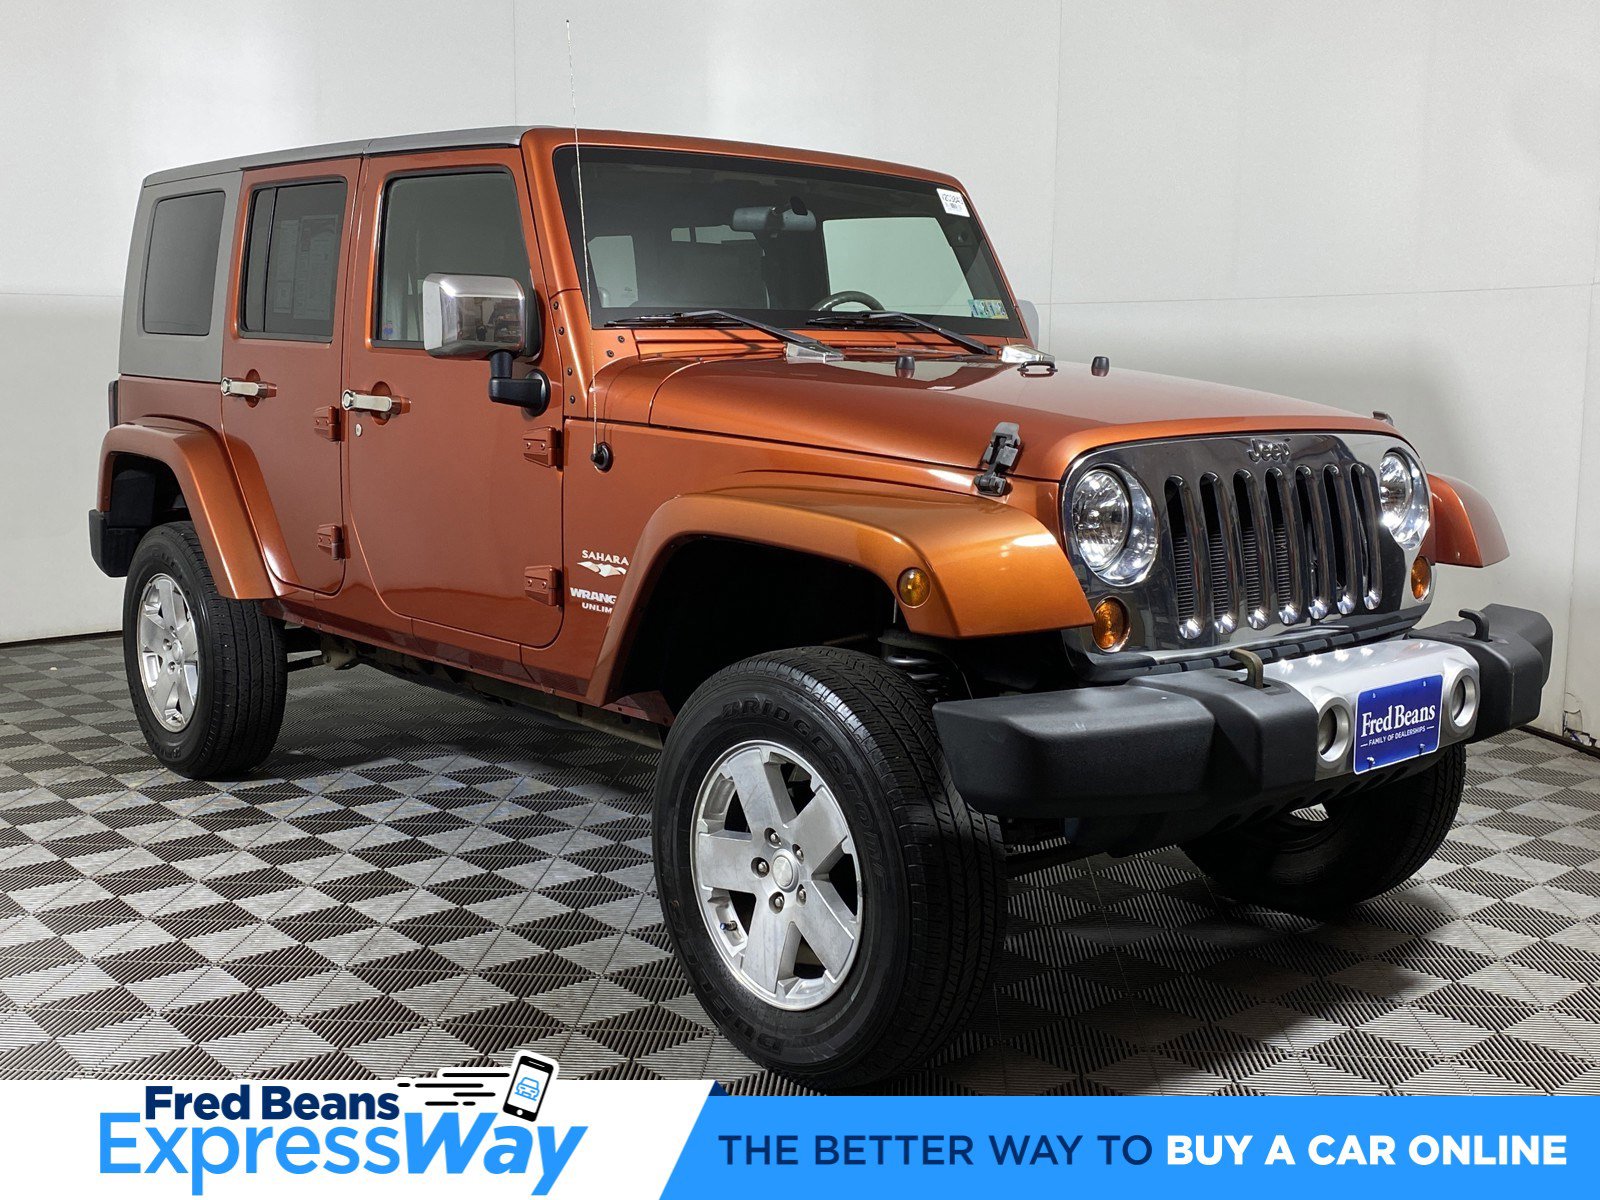 Used 2009 Jeep Wrangler Unlimited For Sale | Boyertown PA |  1J4GA59199L720472